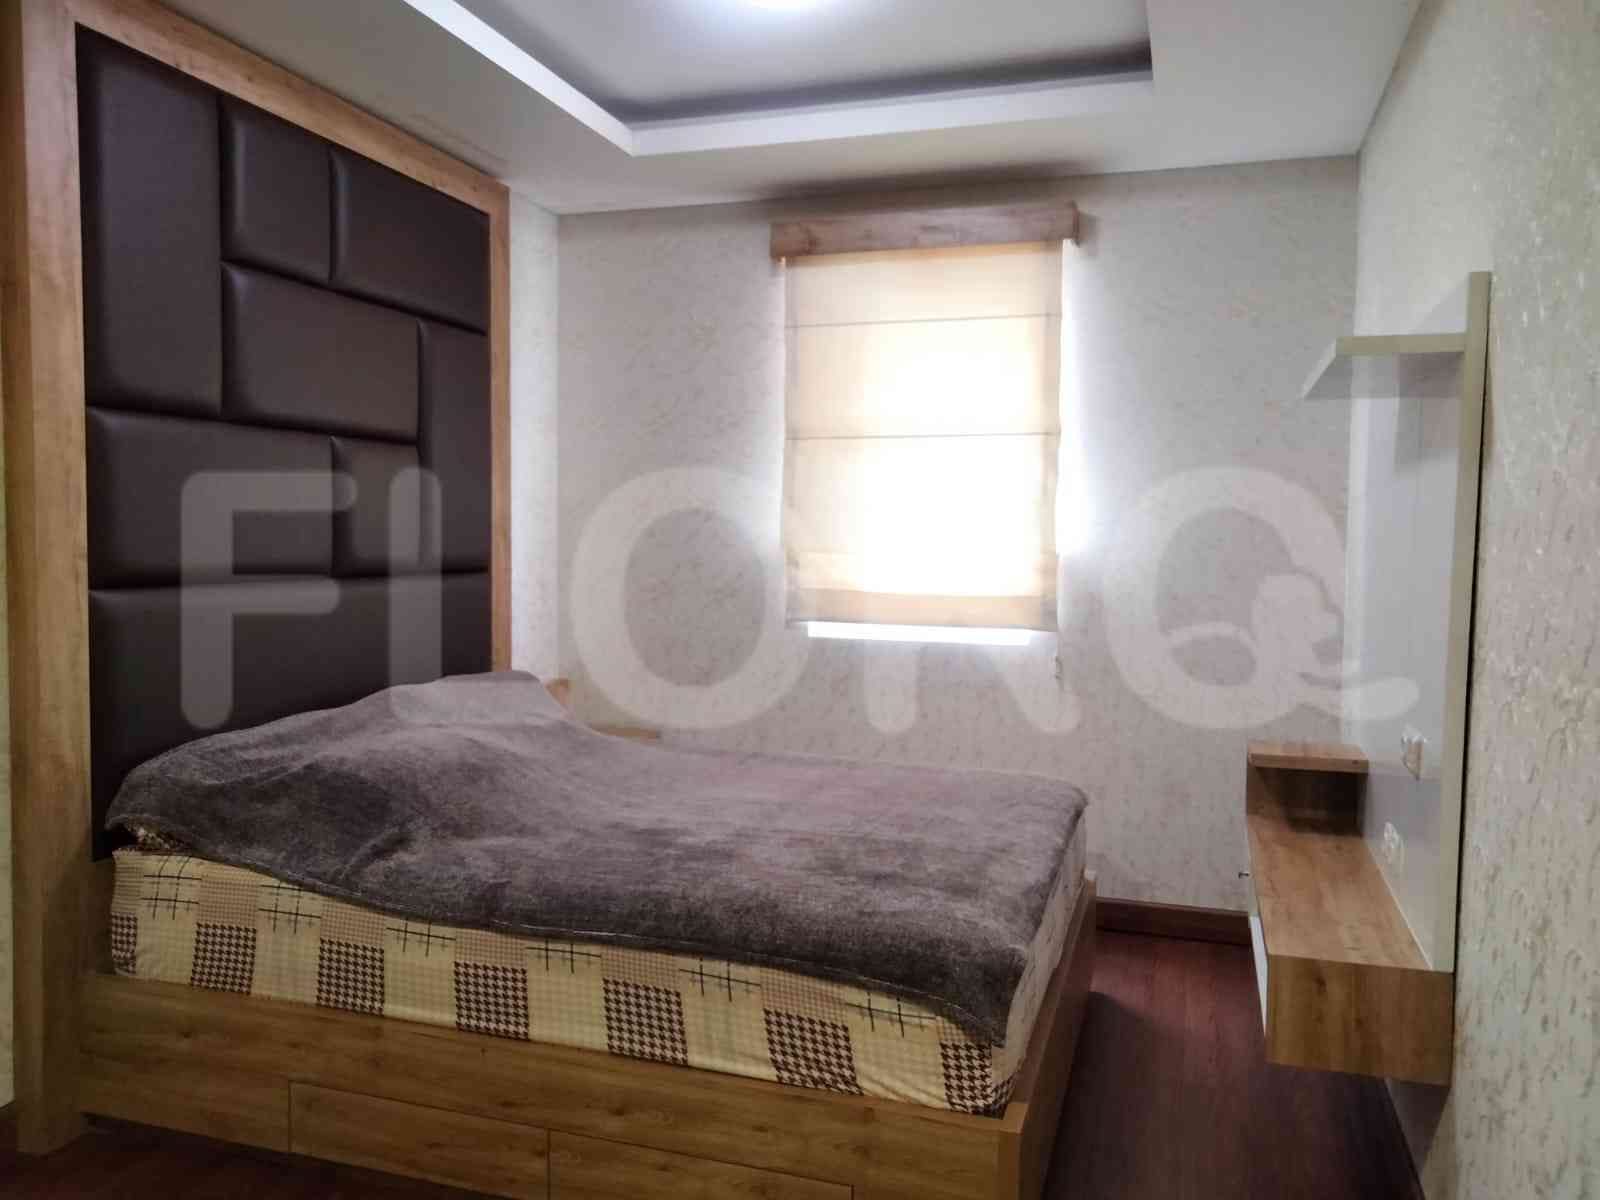 3 Bedroom on 15th Floor for Rent in Grand Palace Kemayoran - fkefdf 11